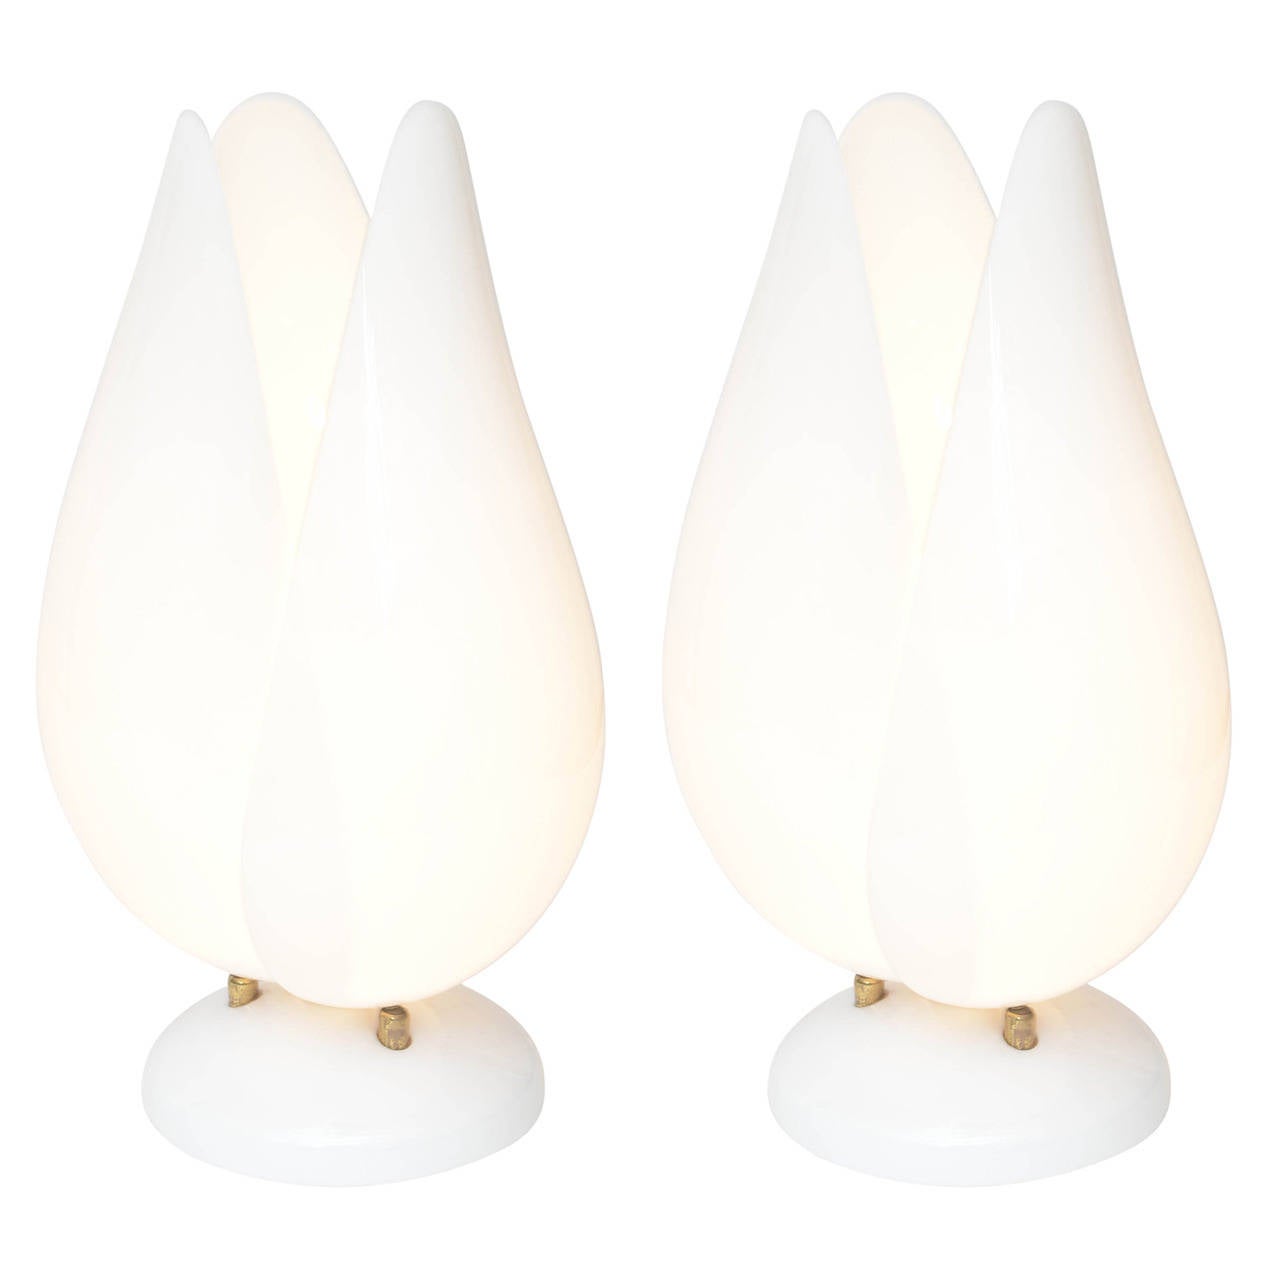 Pair of Rougier-Style Tulip Lamps